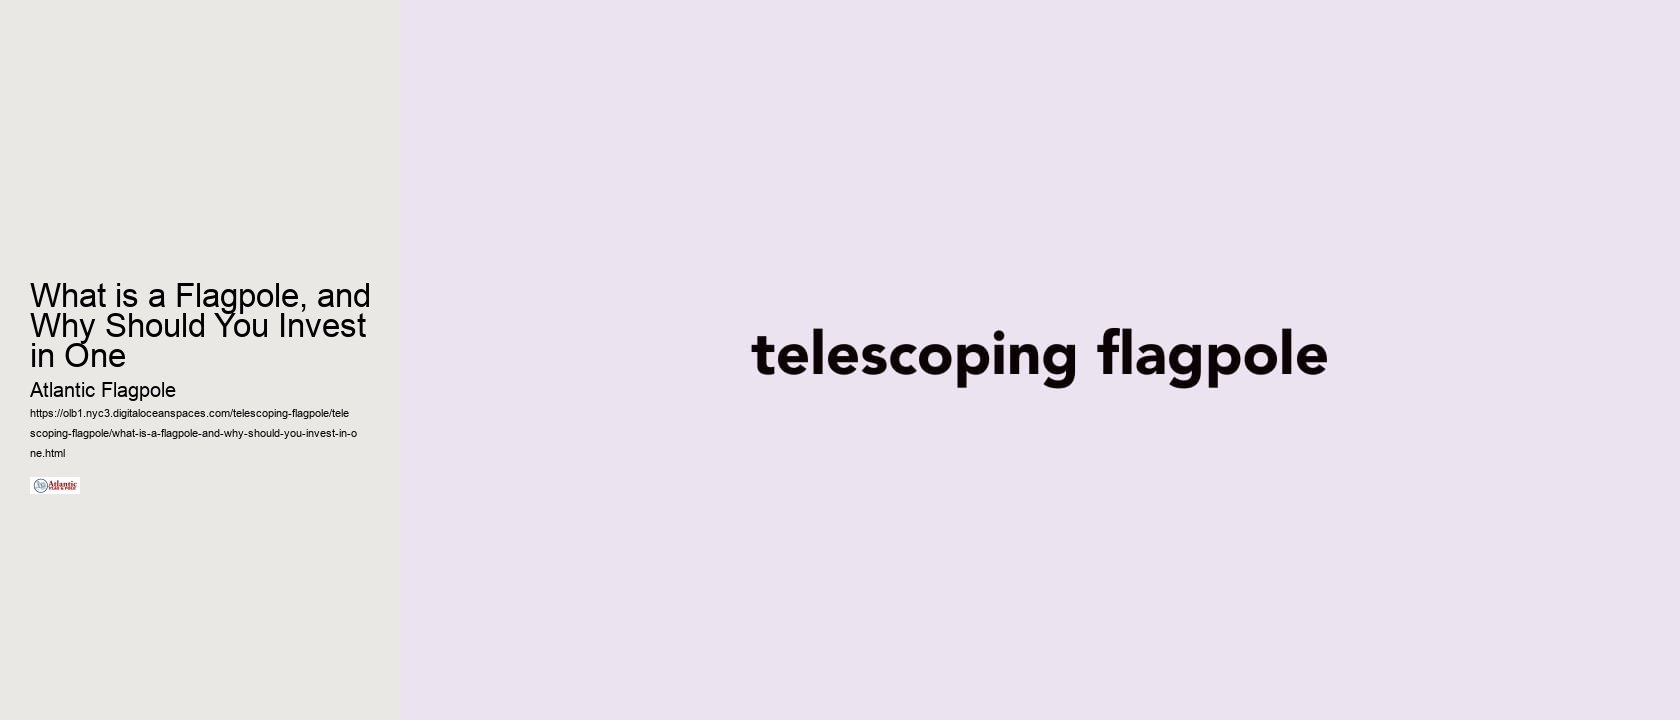 What is a Flagpole, and Why Should You Invest in One